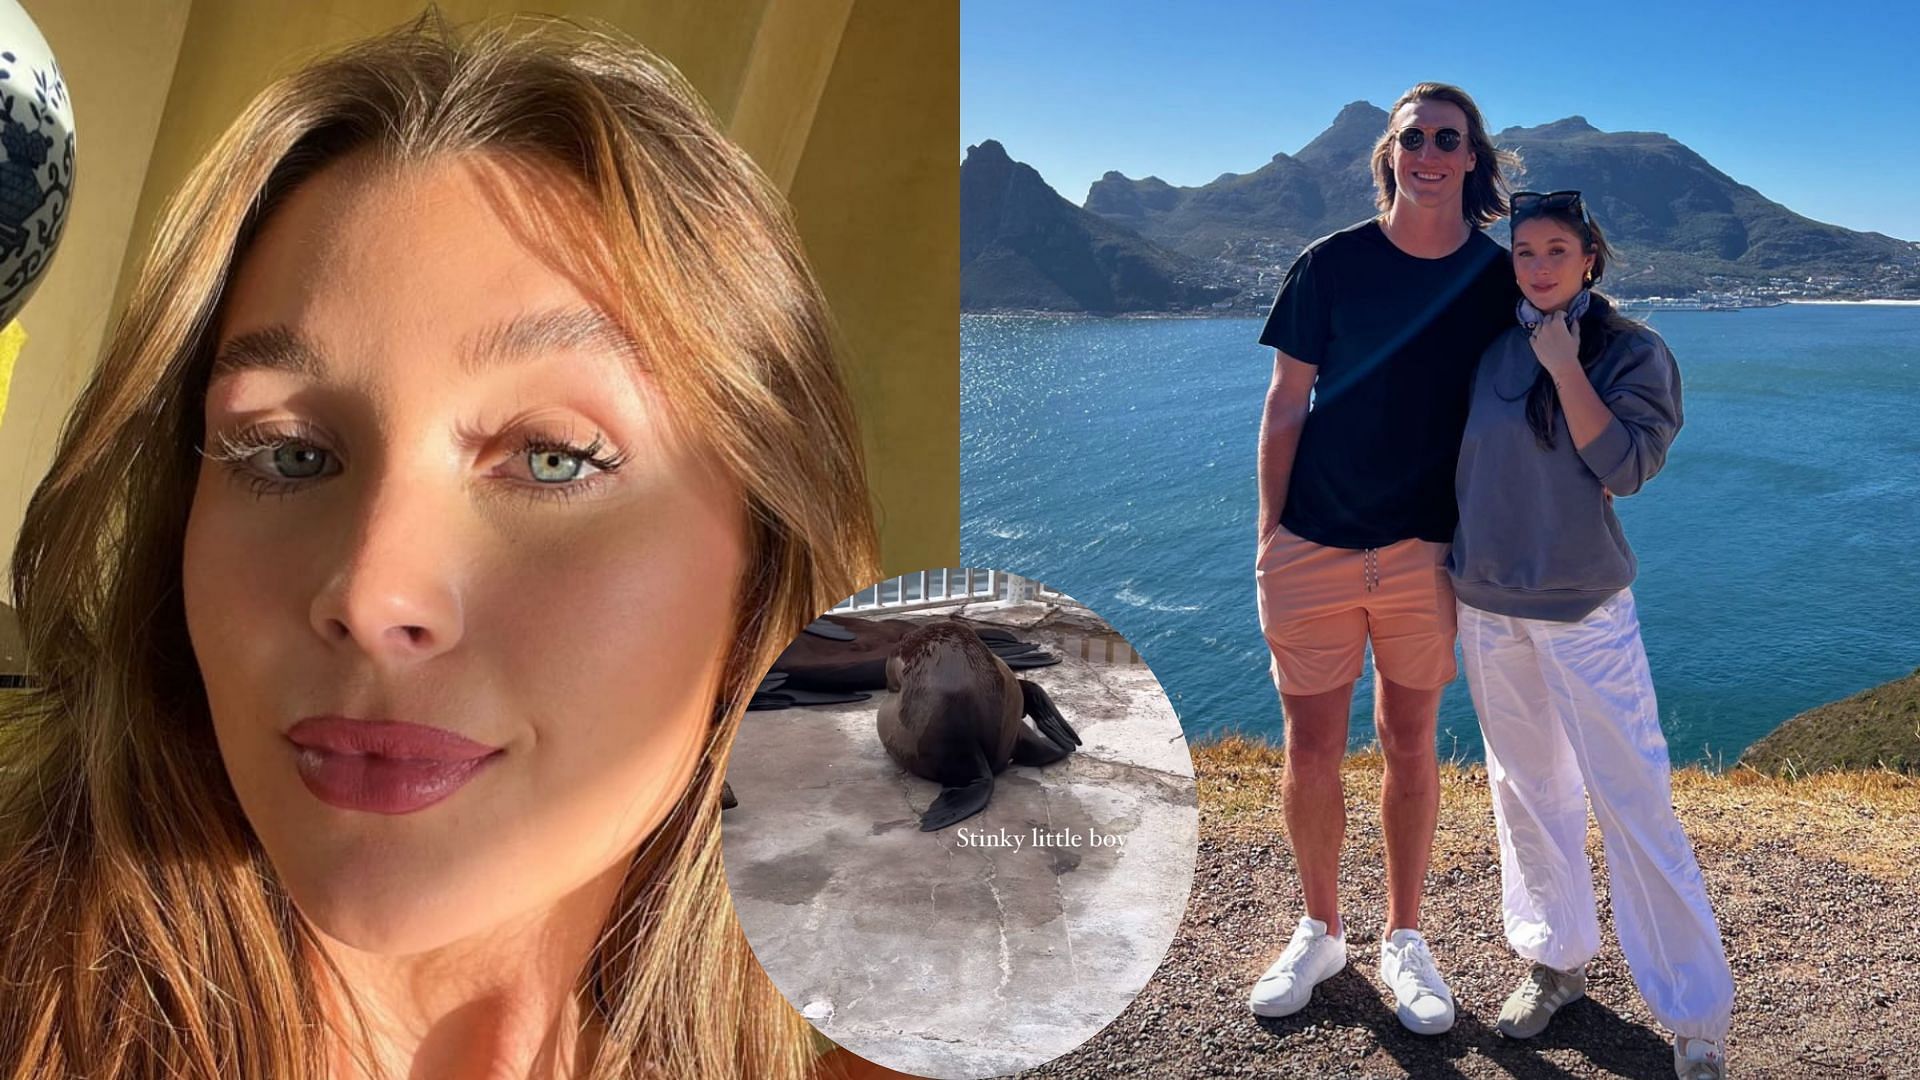 IN PHOTOS: Trevor Lawrence and wife Marissa jet off to serene offseason vacay in South Africa